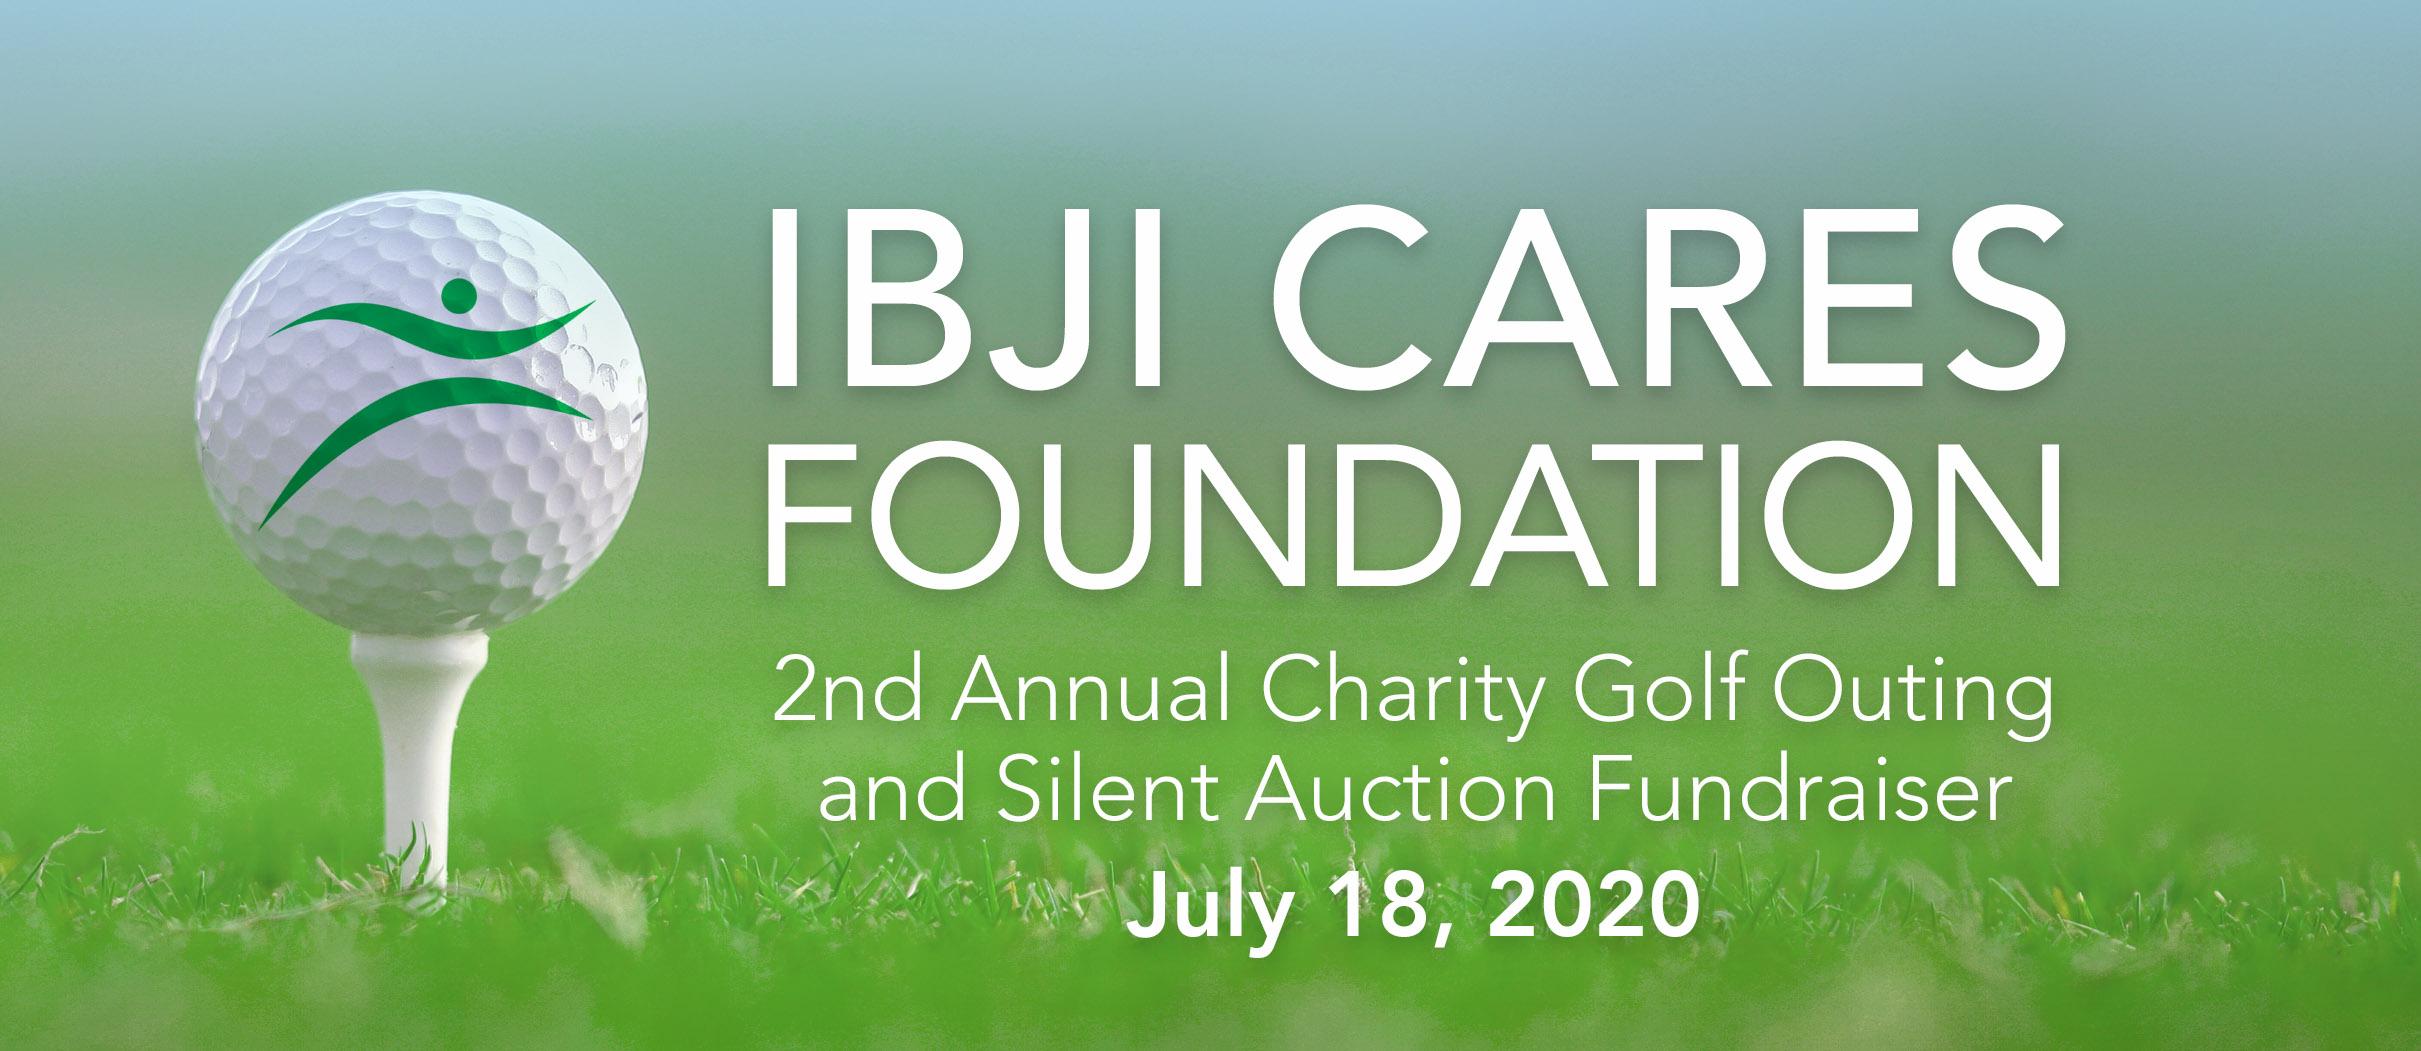 2020 IBJI CARES OPEN Golf Outing & Silent Auction Fundraiser